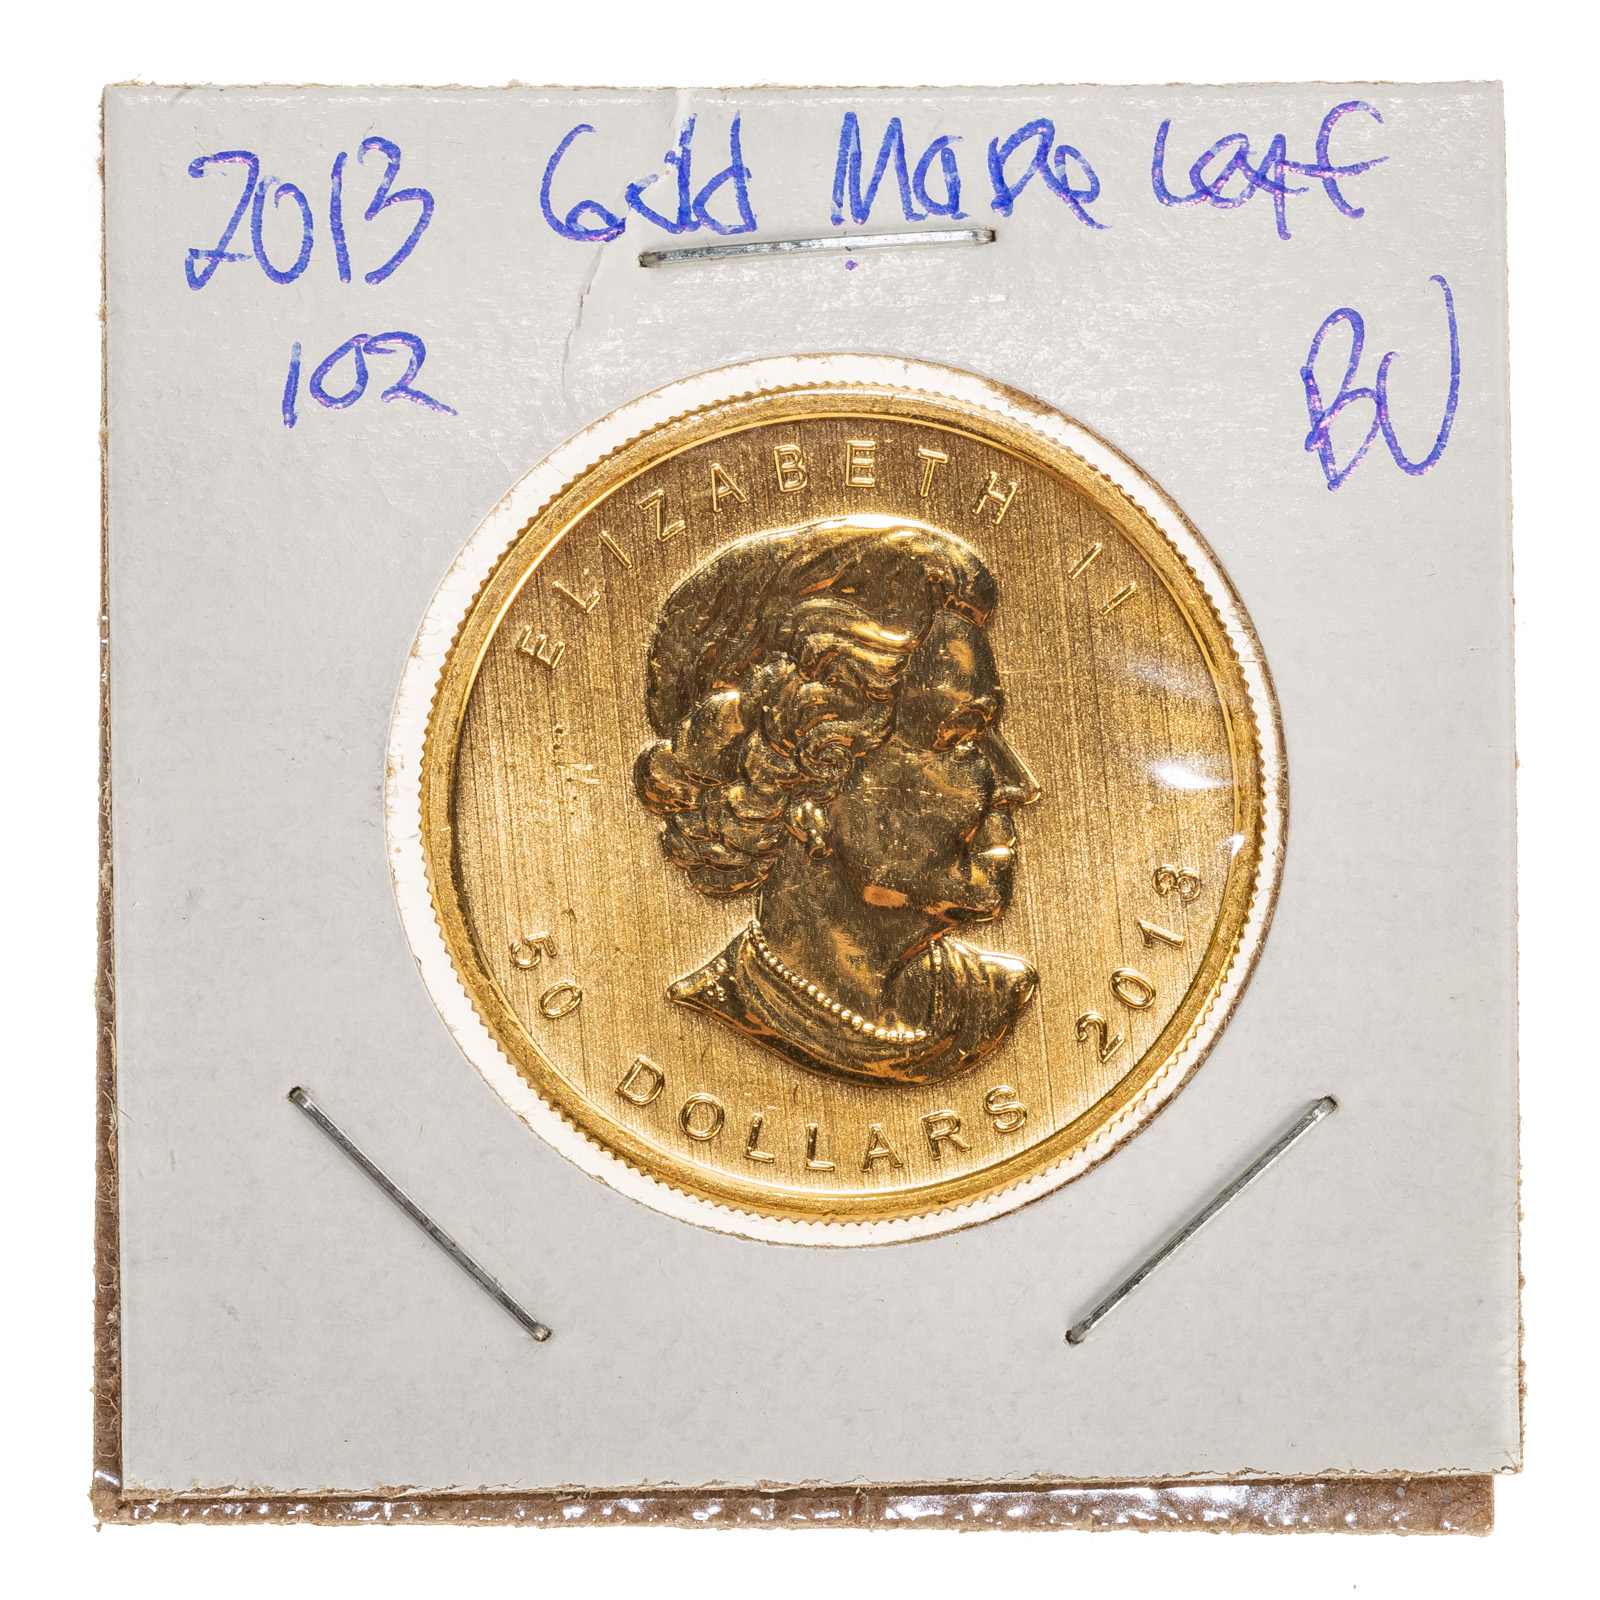 2013 1 OUNCE CANADIAN GOLD MAPLE 287a24